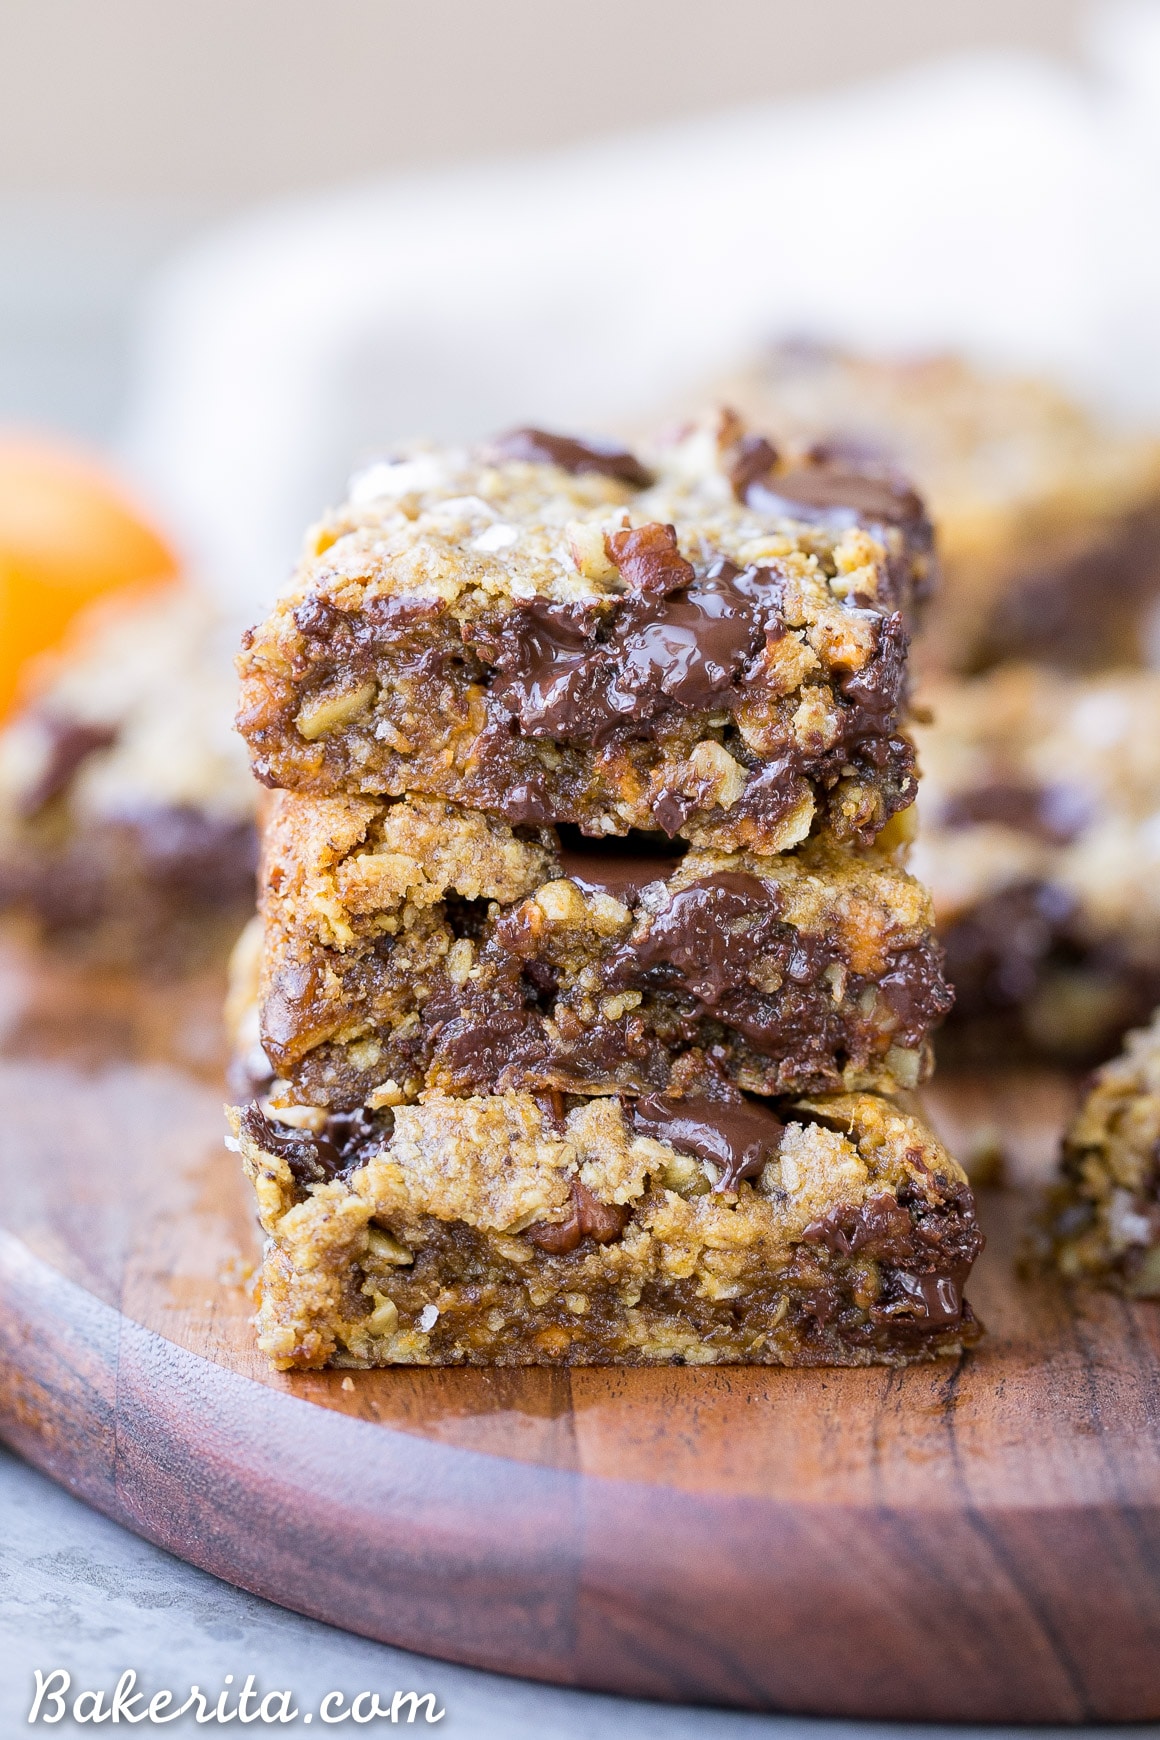 These Pumpkin Oatmeal Scotchie Bars with Chocolate Chips + Pecans are soft, gooey, and absolutely irresistible! These decadent dessert bars couldn't be easier to make.